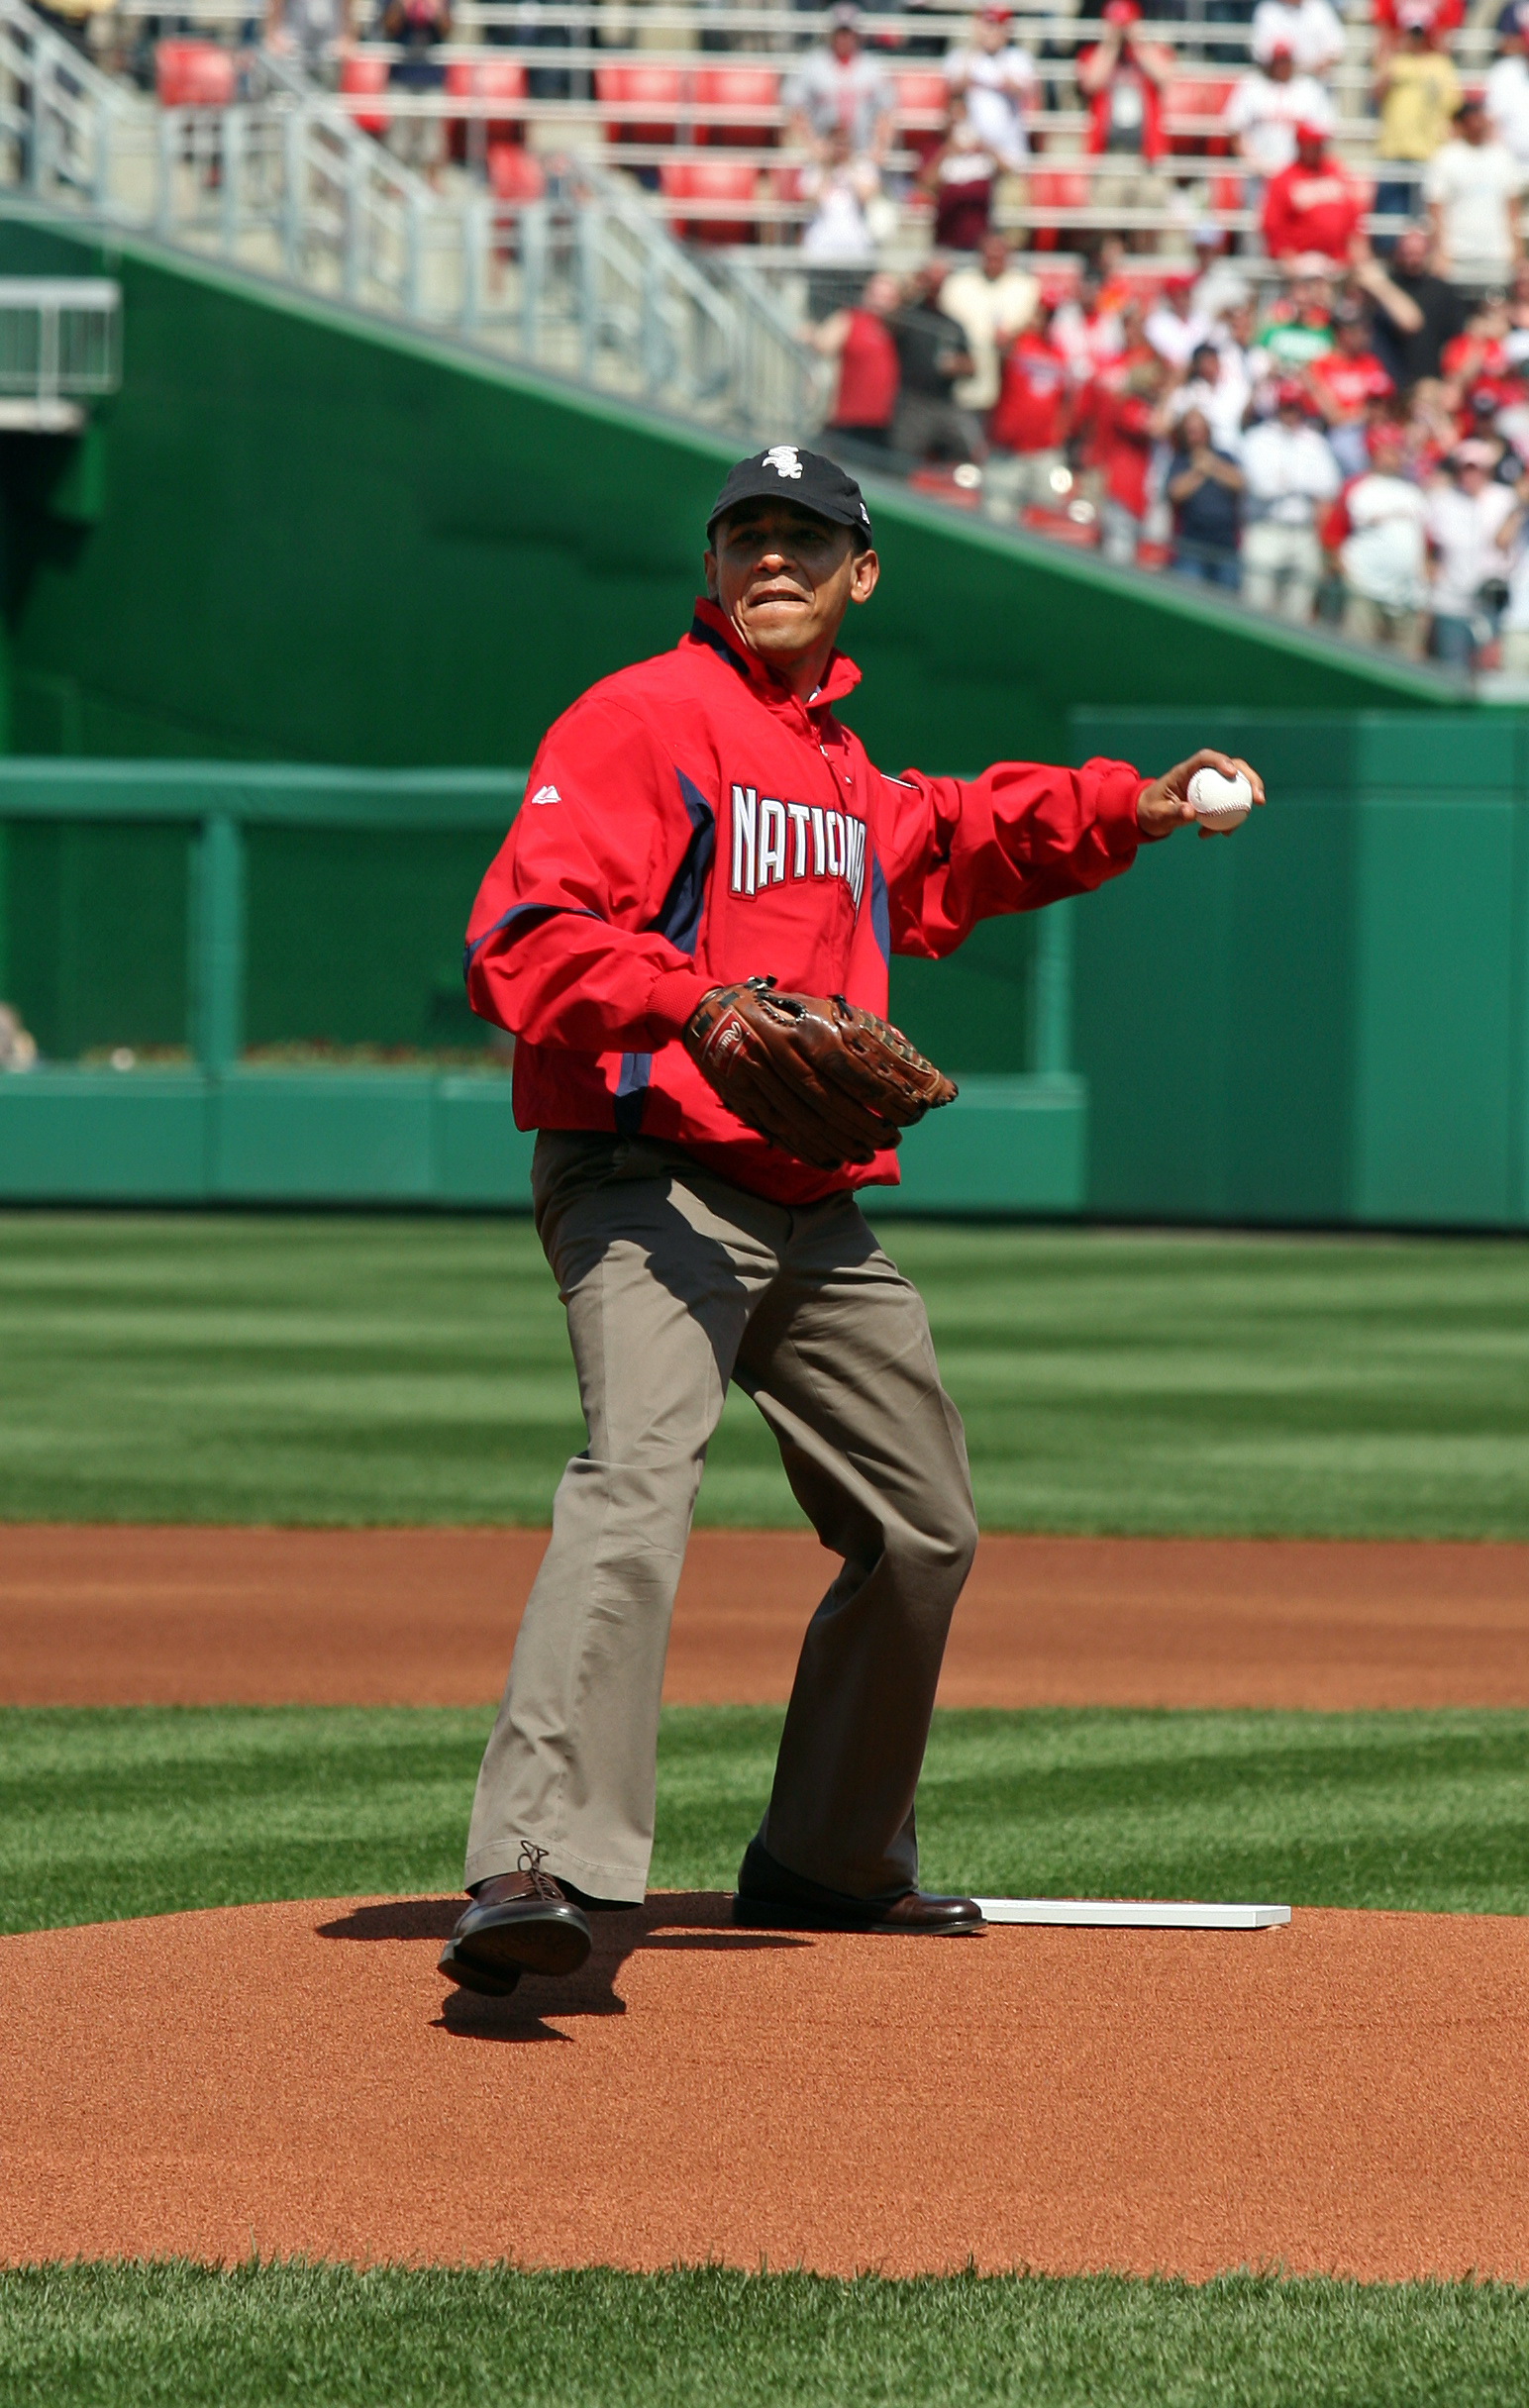 WASHINGTON - APRIL 05:  U.S. President Barack Obama throws out the opening pitch before the game between the Philadelphia Phillies and the Washington Nationals on Opening Day at Nationals Park on April 5, 2010 in Washington, DC.  (Photo by Martin H. Simon